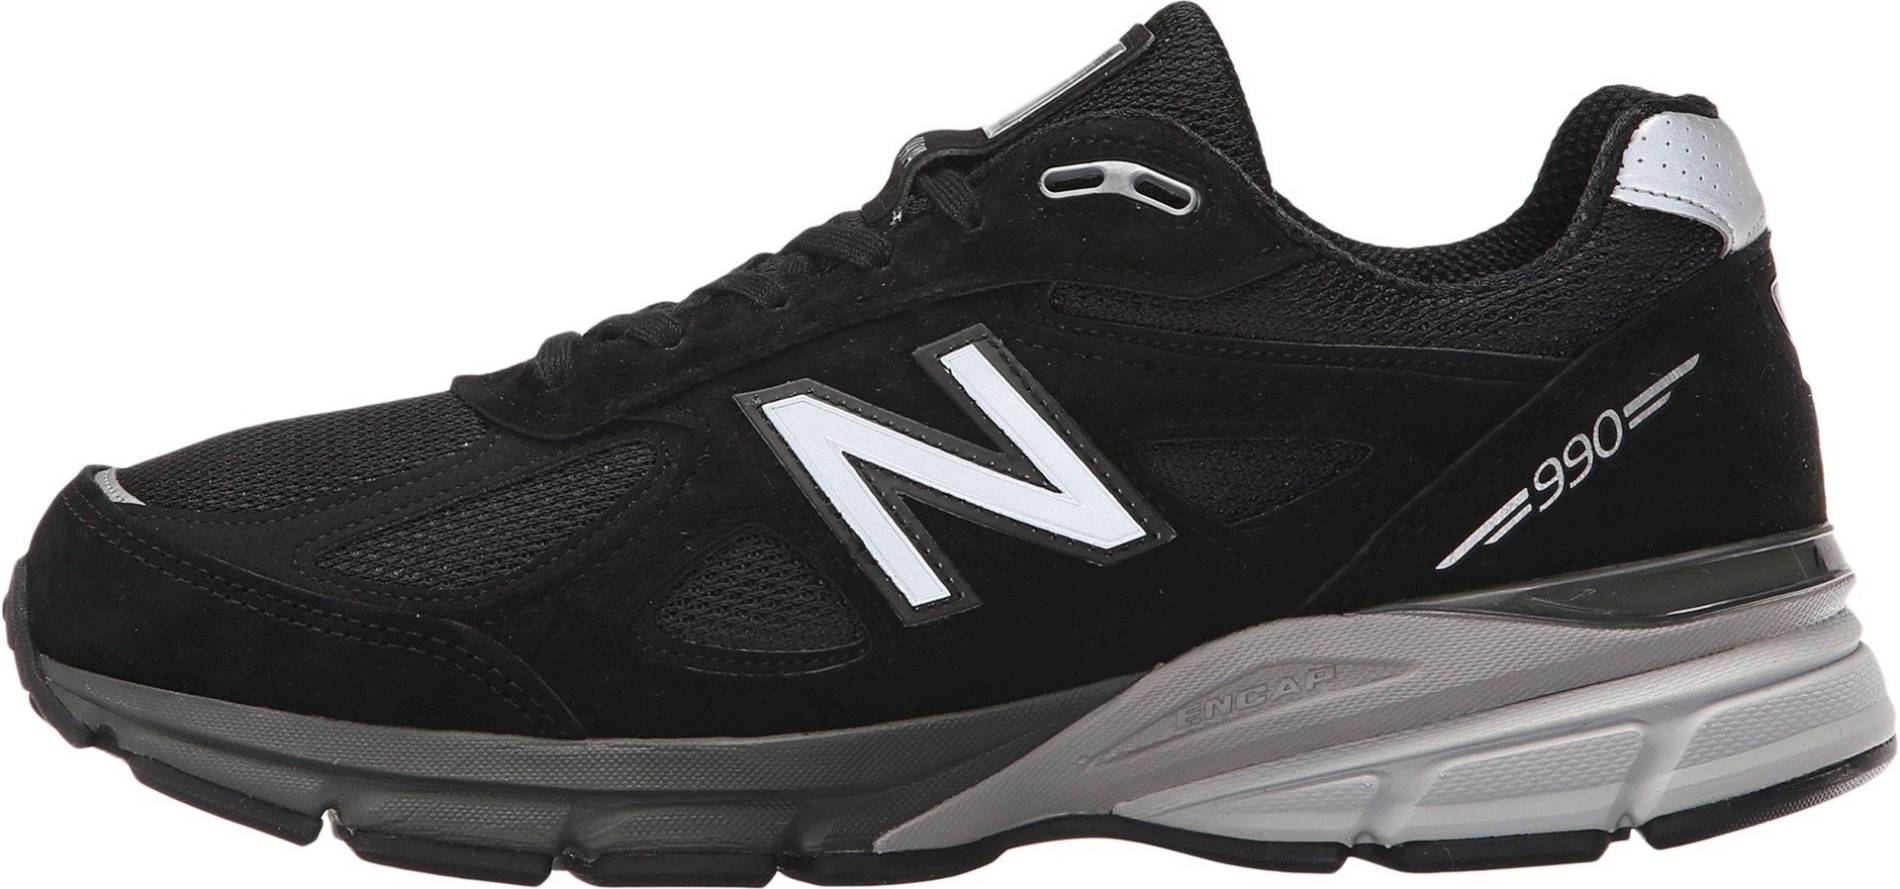 New Balance 990 v4 sneakers in 10+ colors (only $156) | RunRepeat